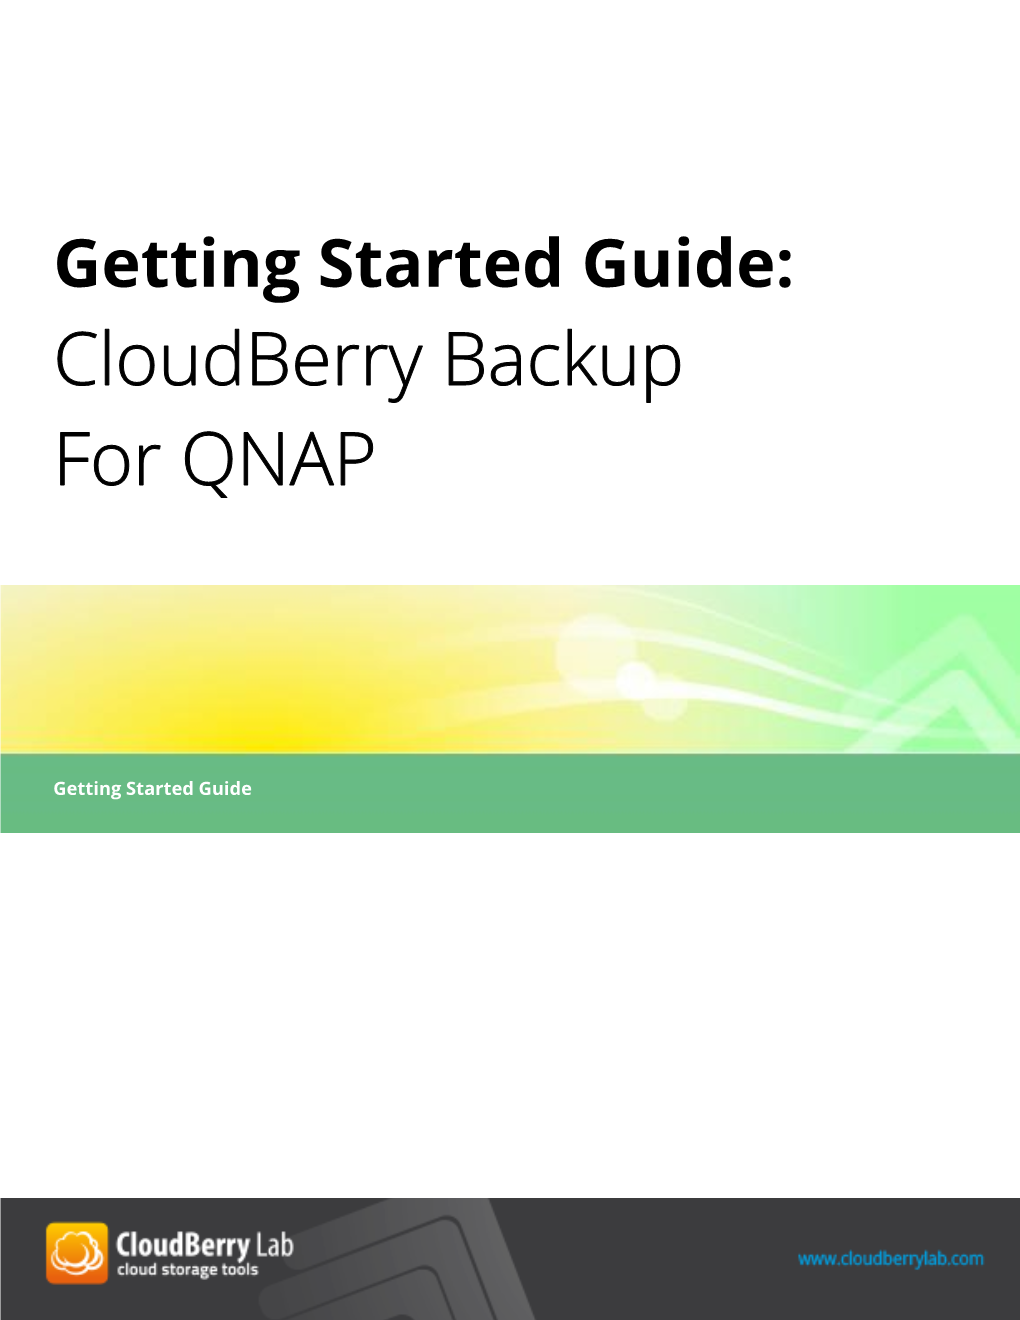 Cloudberry Backup for QNAP